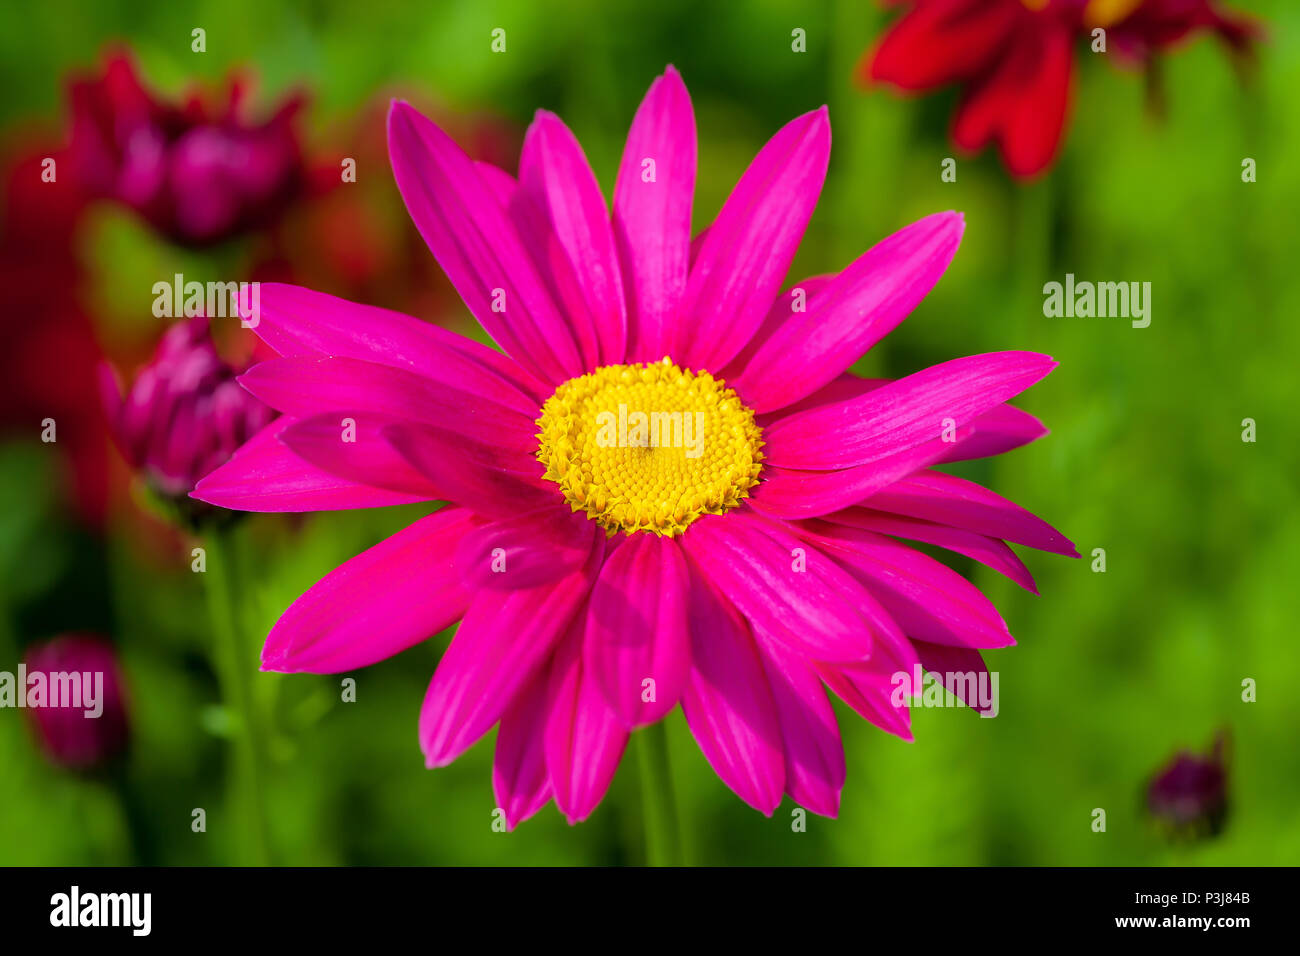 Painted daisy in the summer garden. Stock Photo